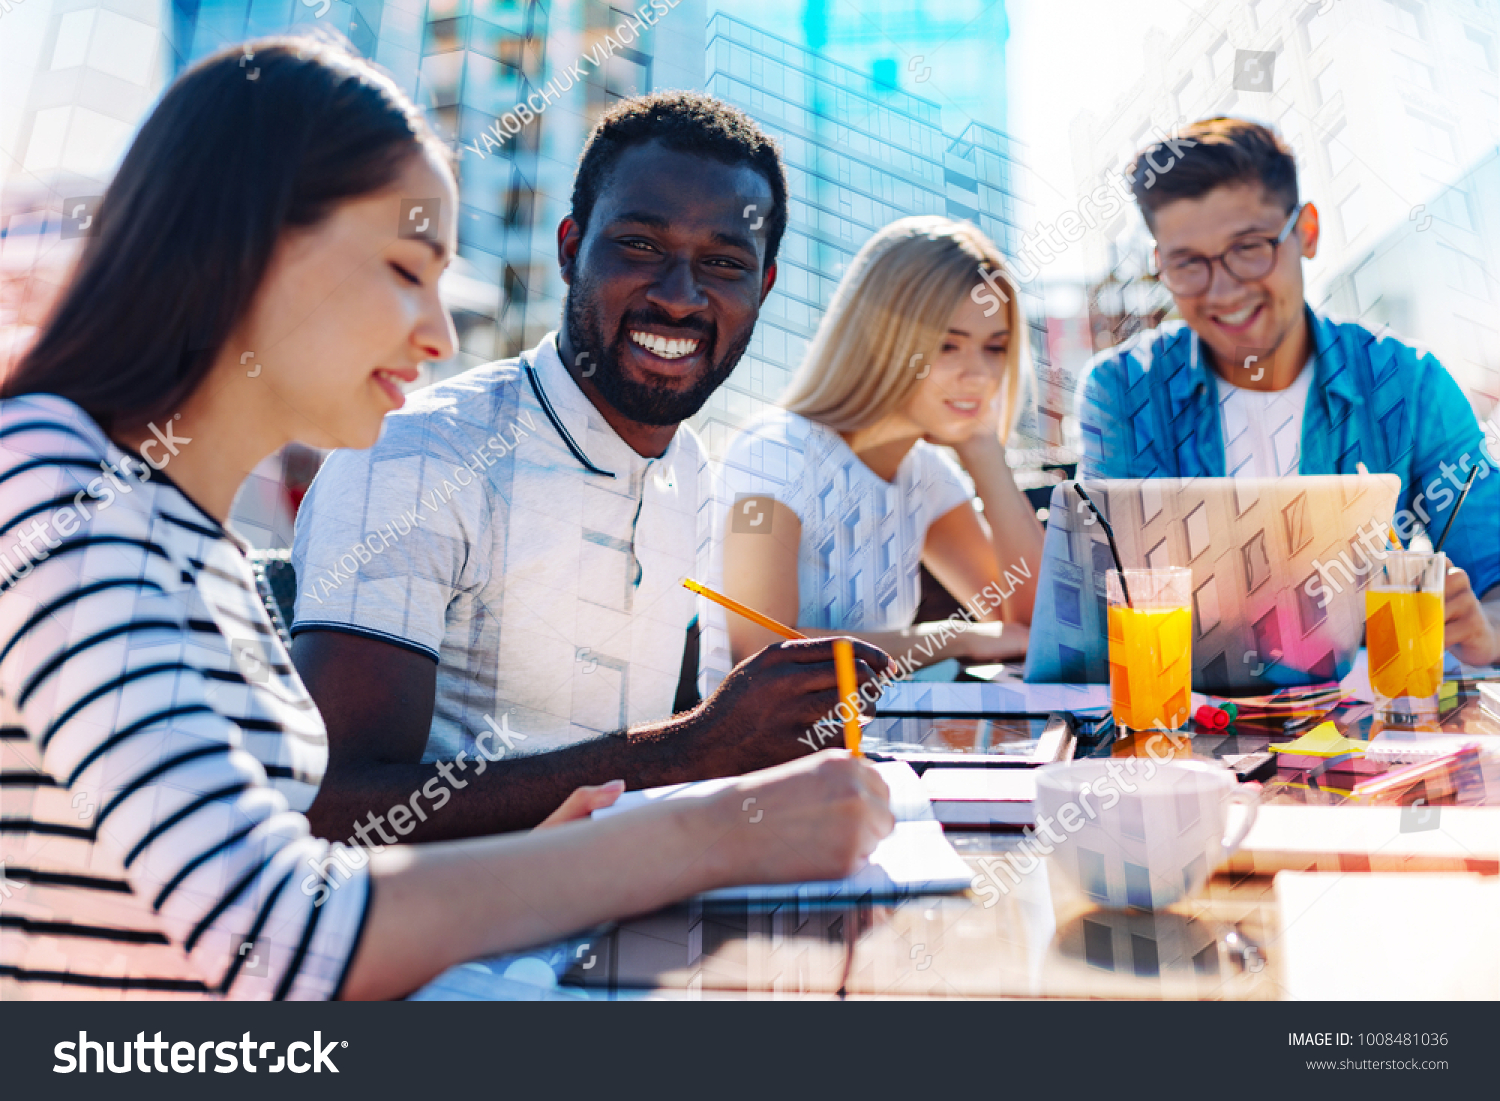 Working together. Handsome cheerful afro-american man smiling and holding a pencil while working with his colleagues on a project #1008481036